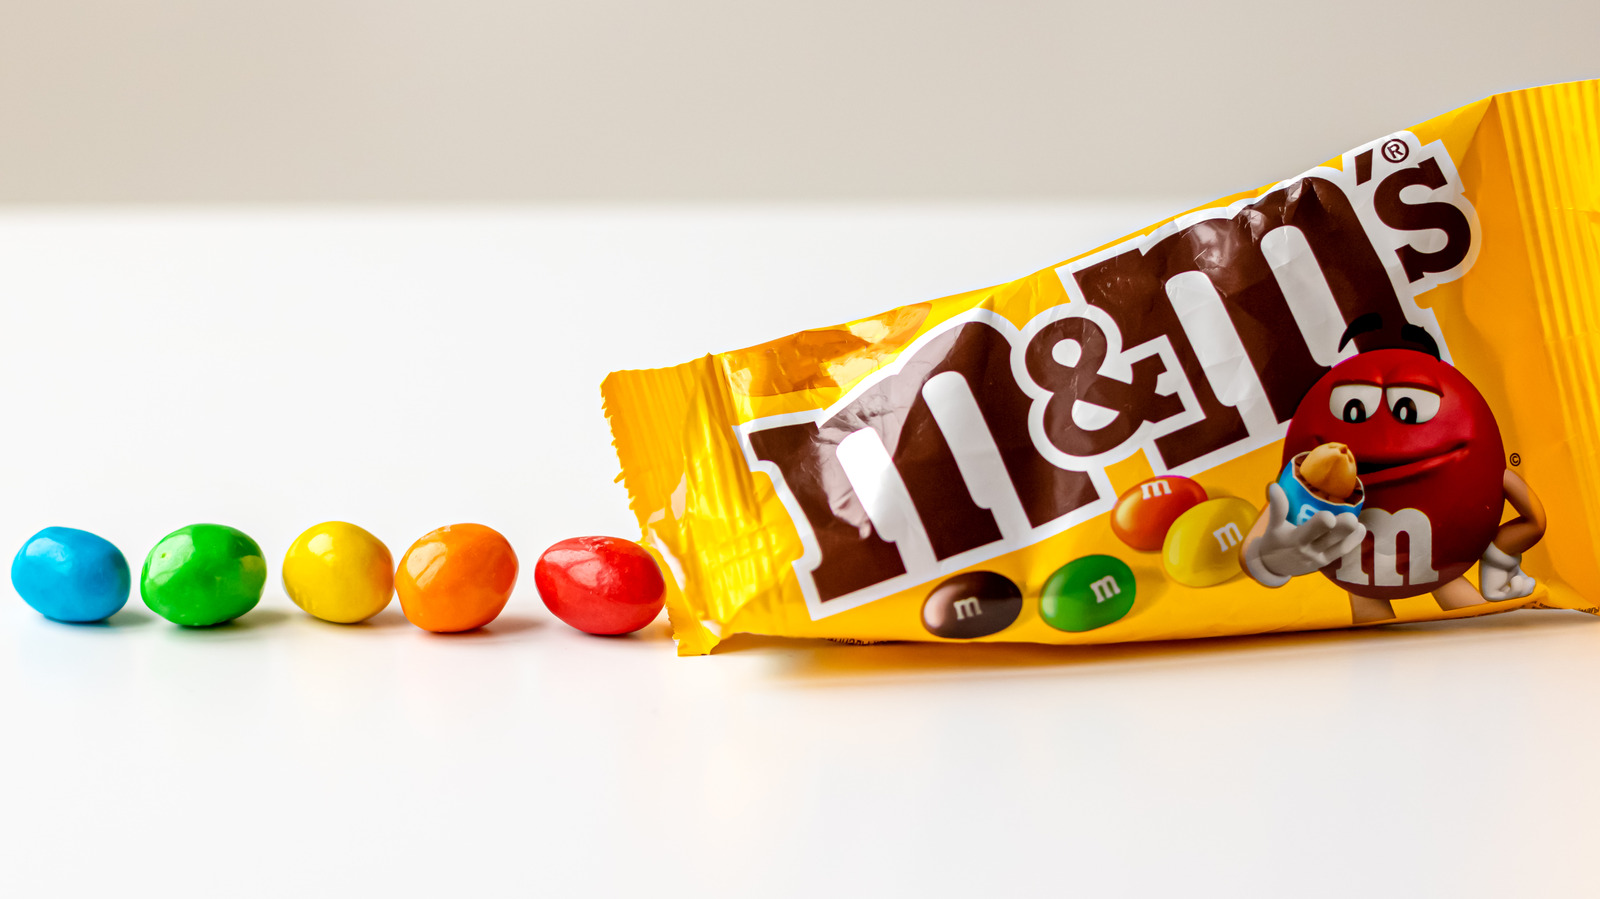 Peanut M&M's Lacked The Iconic Colorful Look When They Debuted